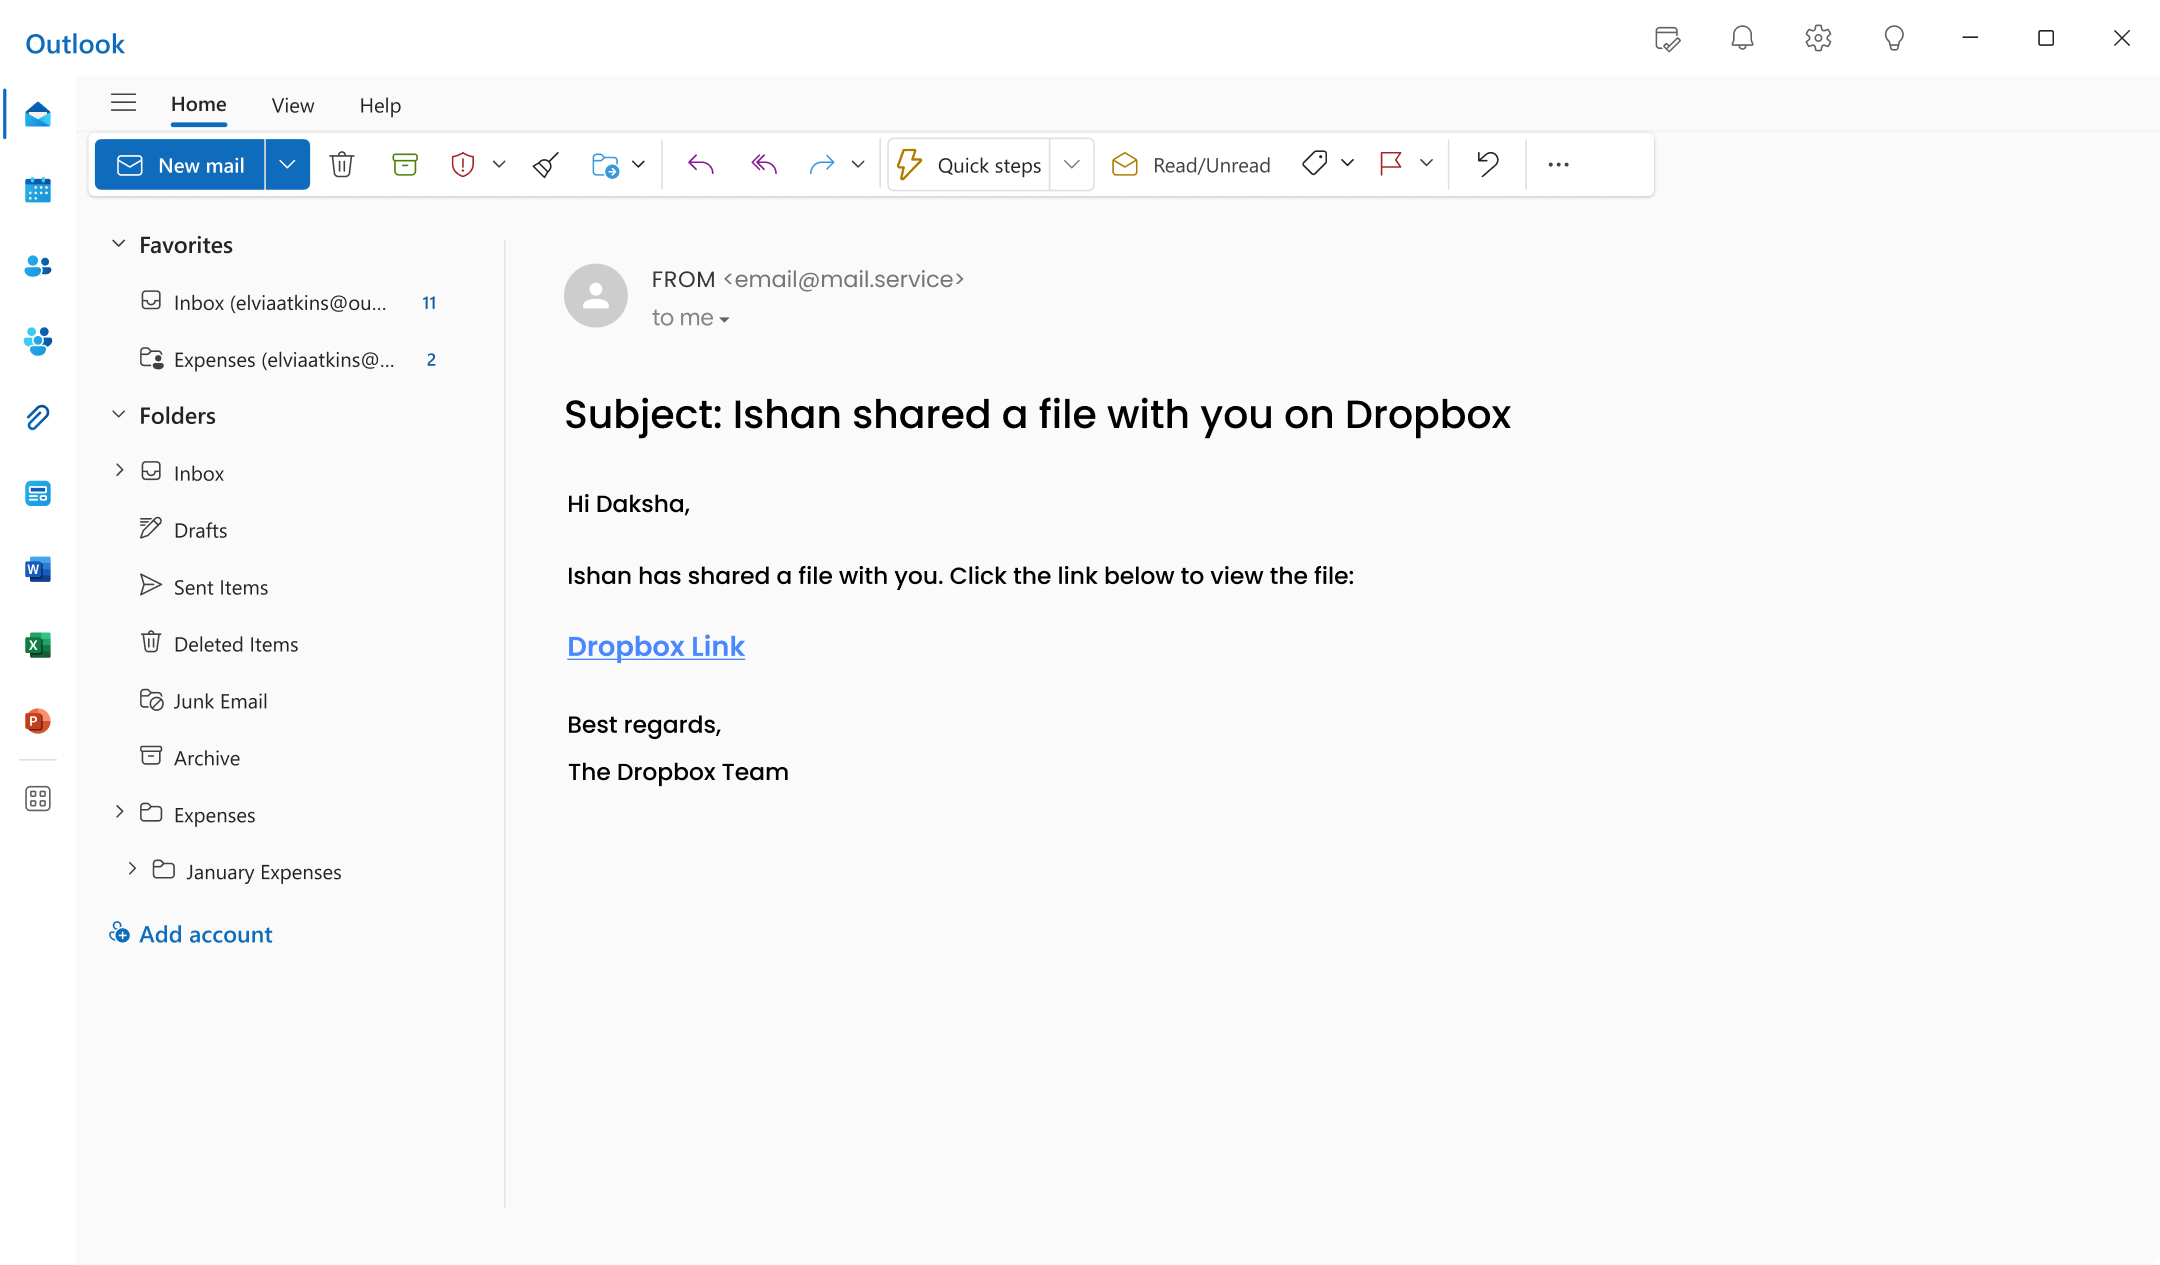 shared a file with you on dropbox phishing email template
